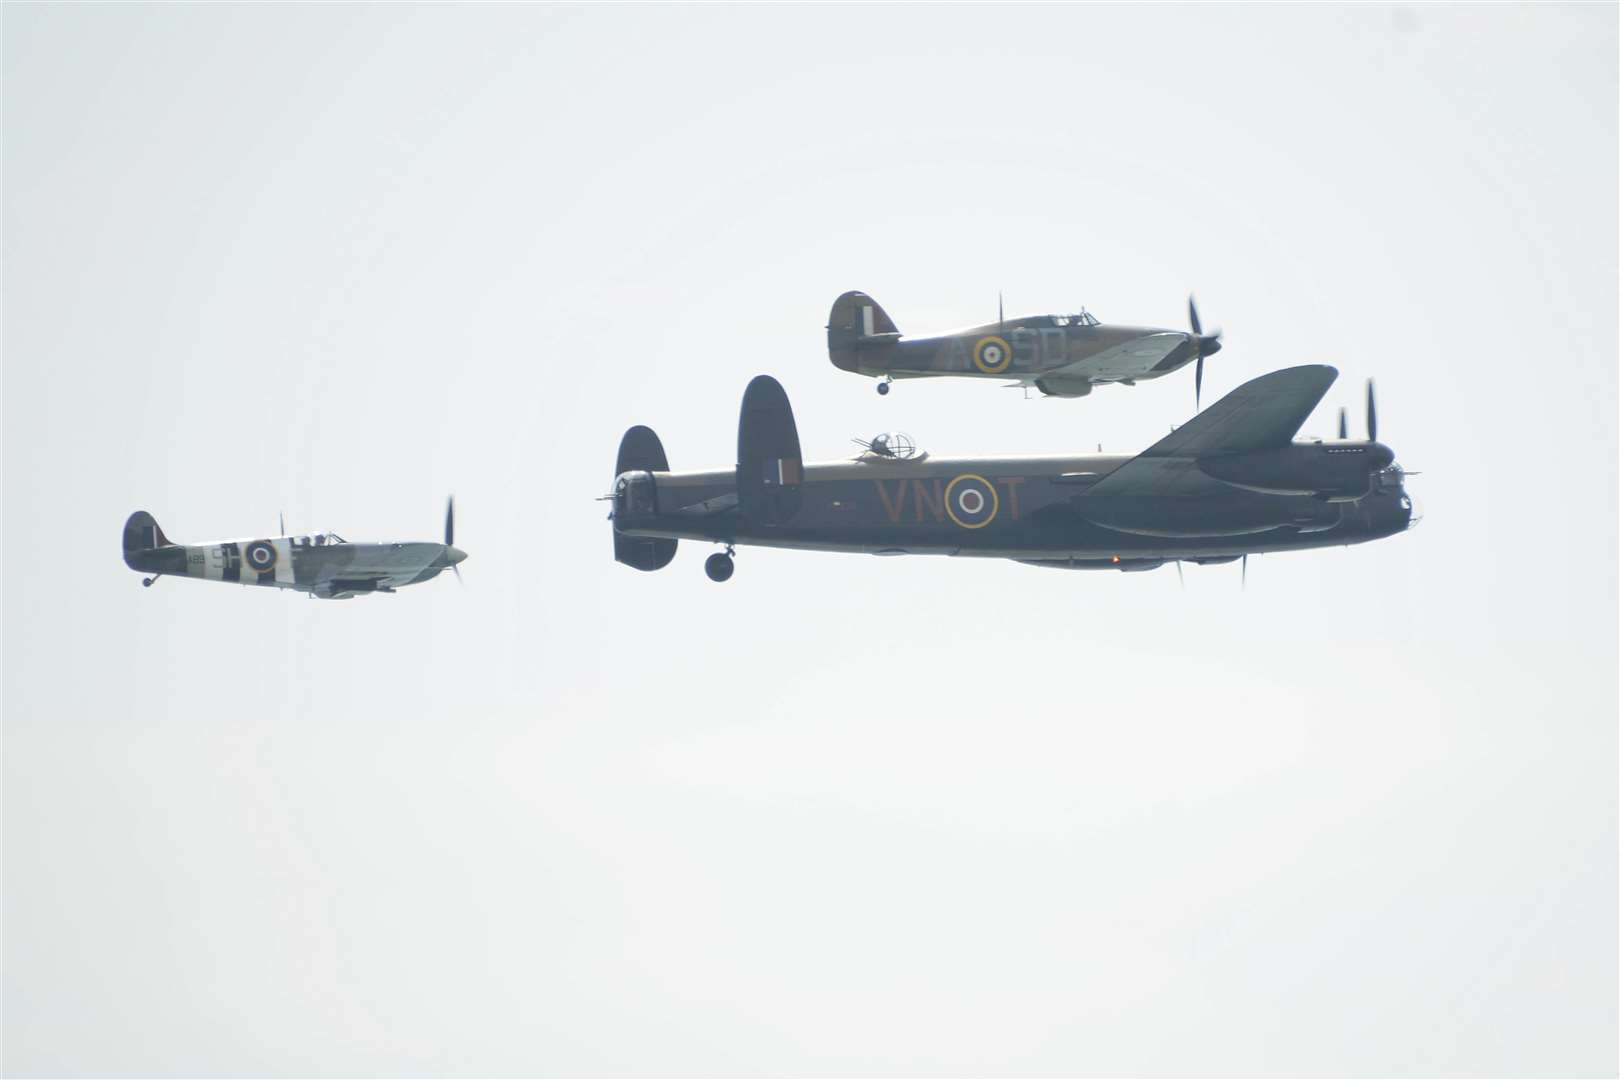 The Lancaster, Hurricane and Spitfire